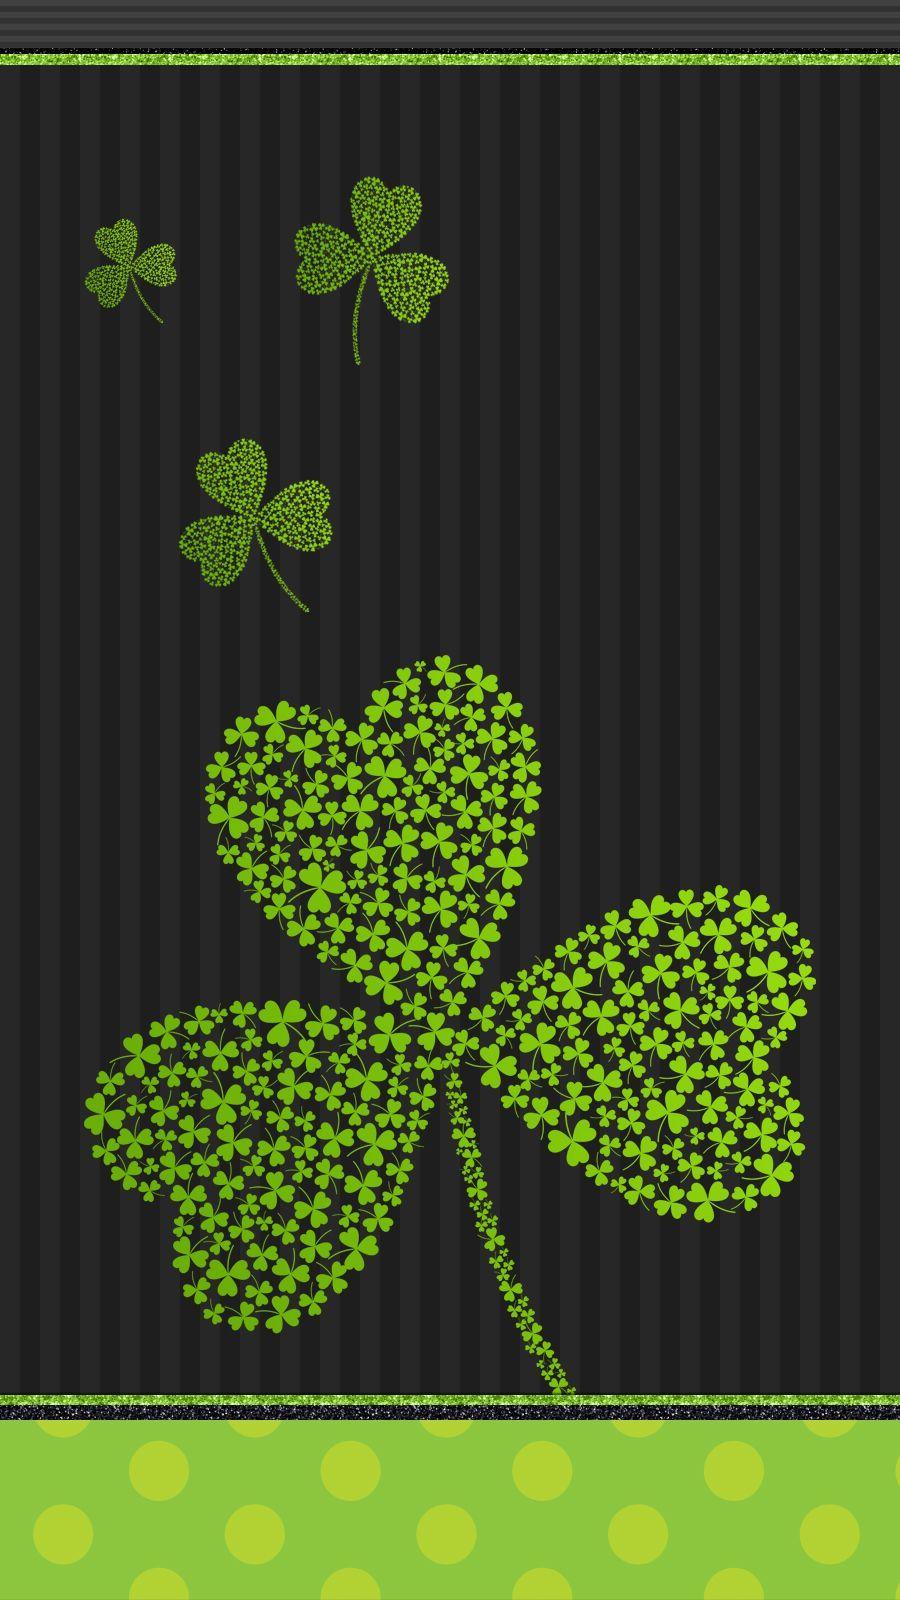 iPhone Wall: St.Patrick's Day tjn. iPhone Walls: St. Patrick's Day